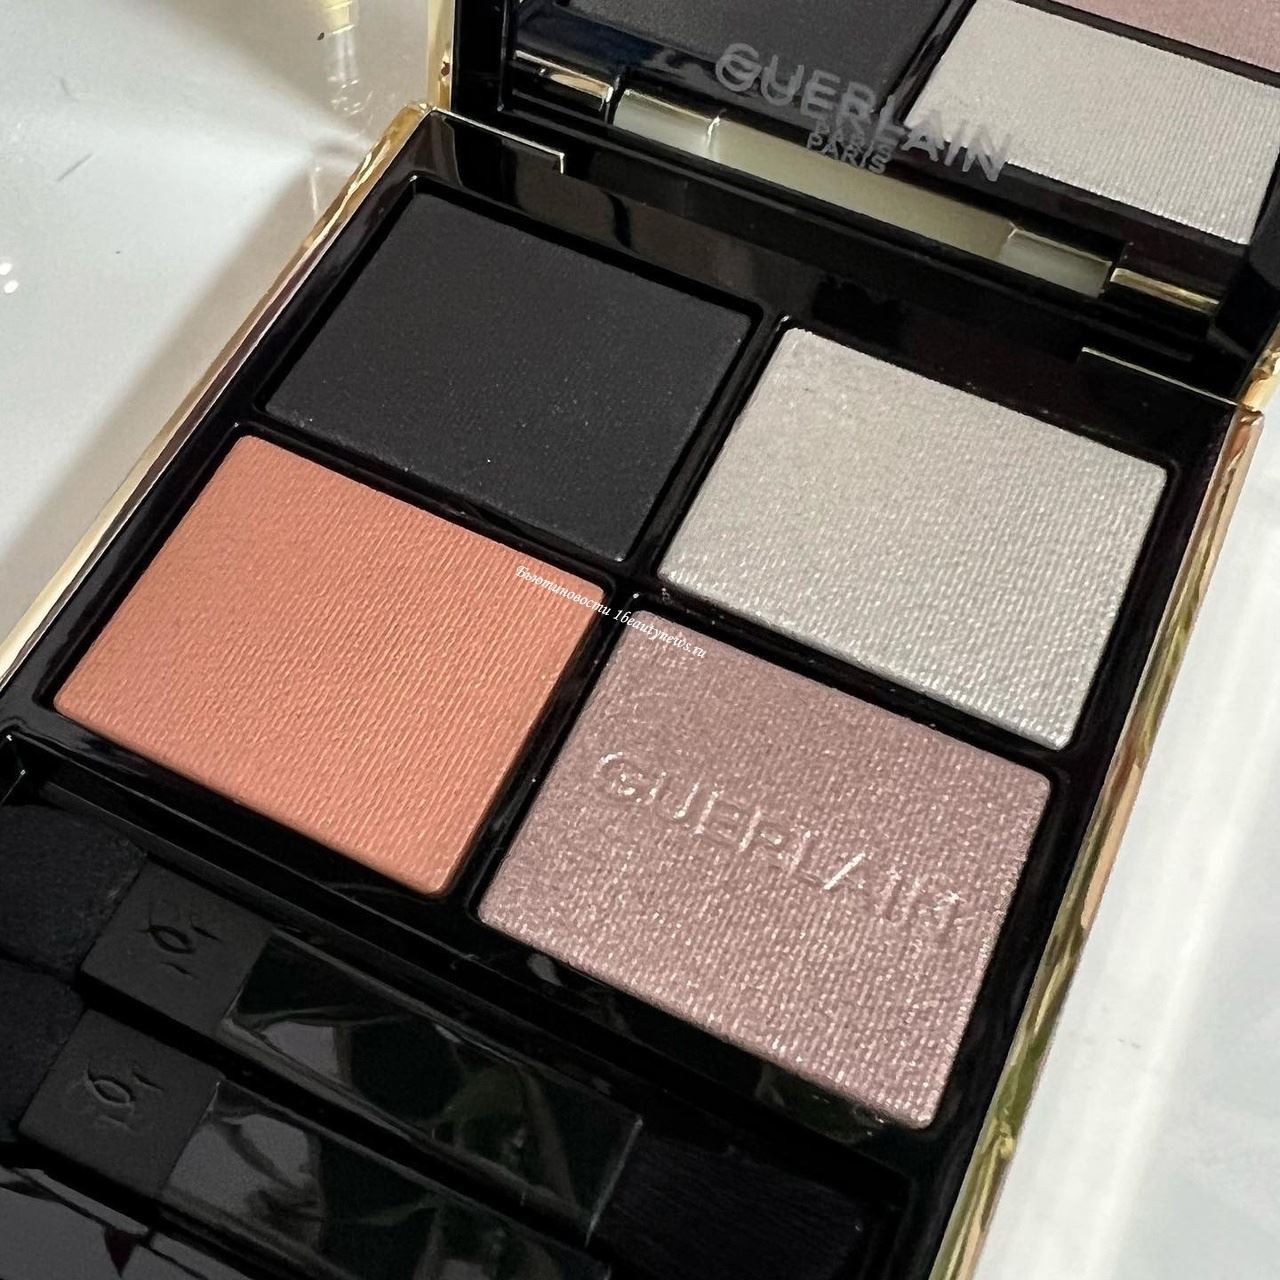 Guerlain Ombres G Eyeshadow Palette 2022 - 011 Imperial Moon - Swatches